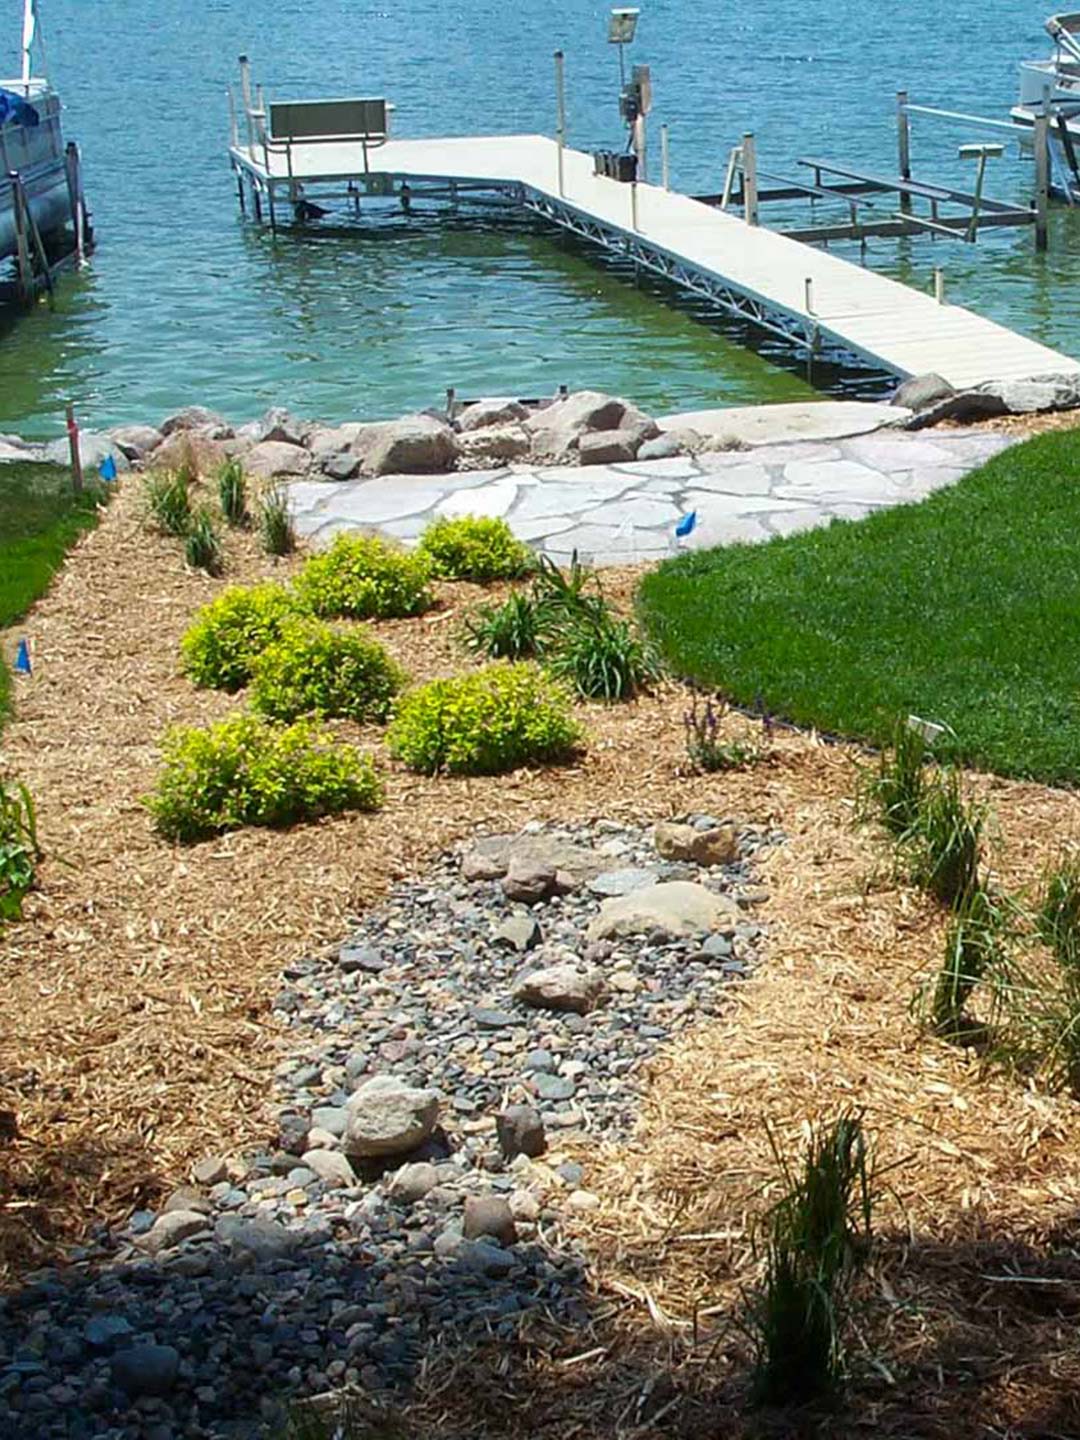 Residential waterfront landscaping by Greenside Inc in Savage, MN.